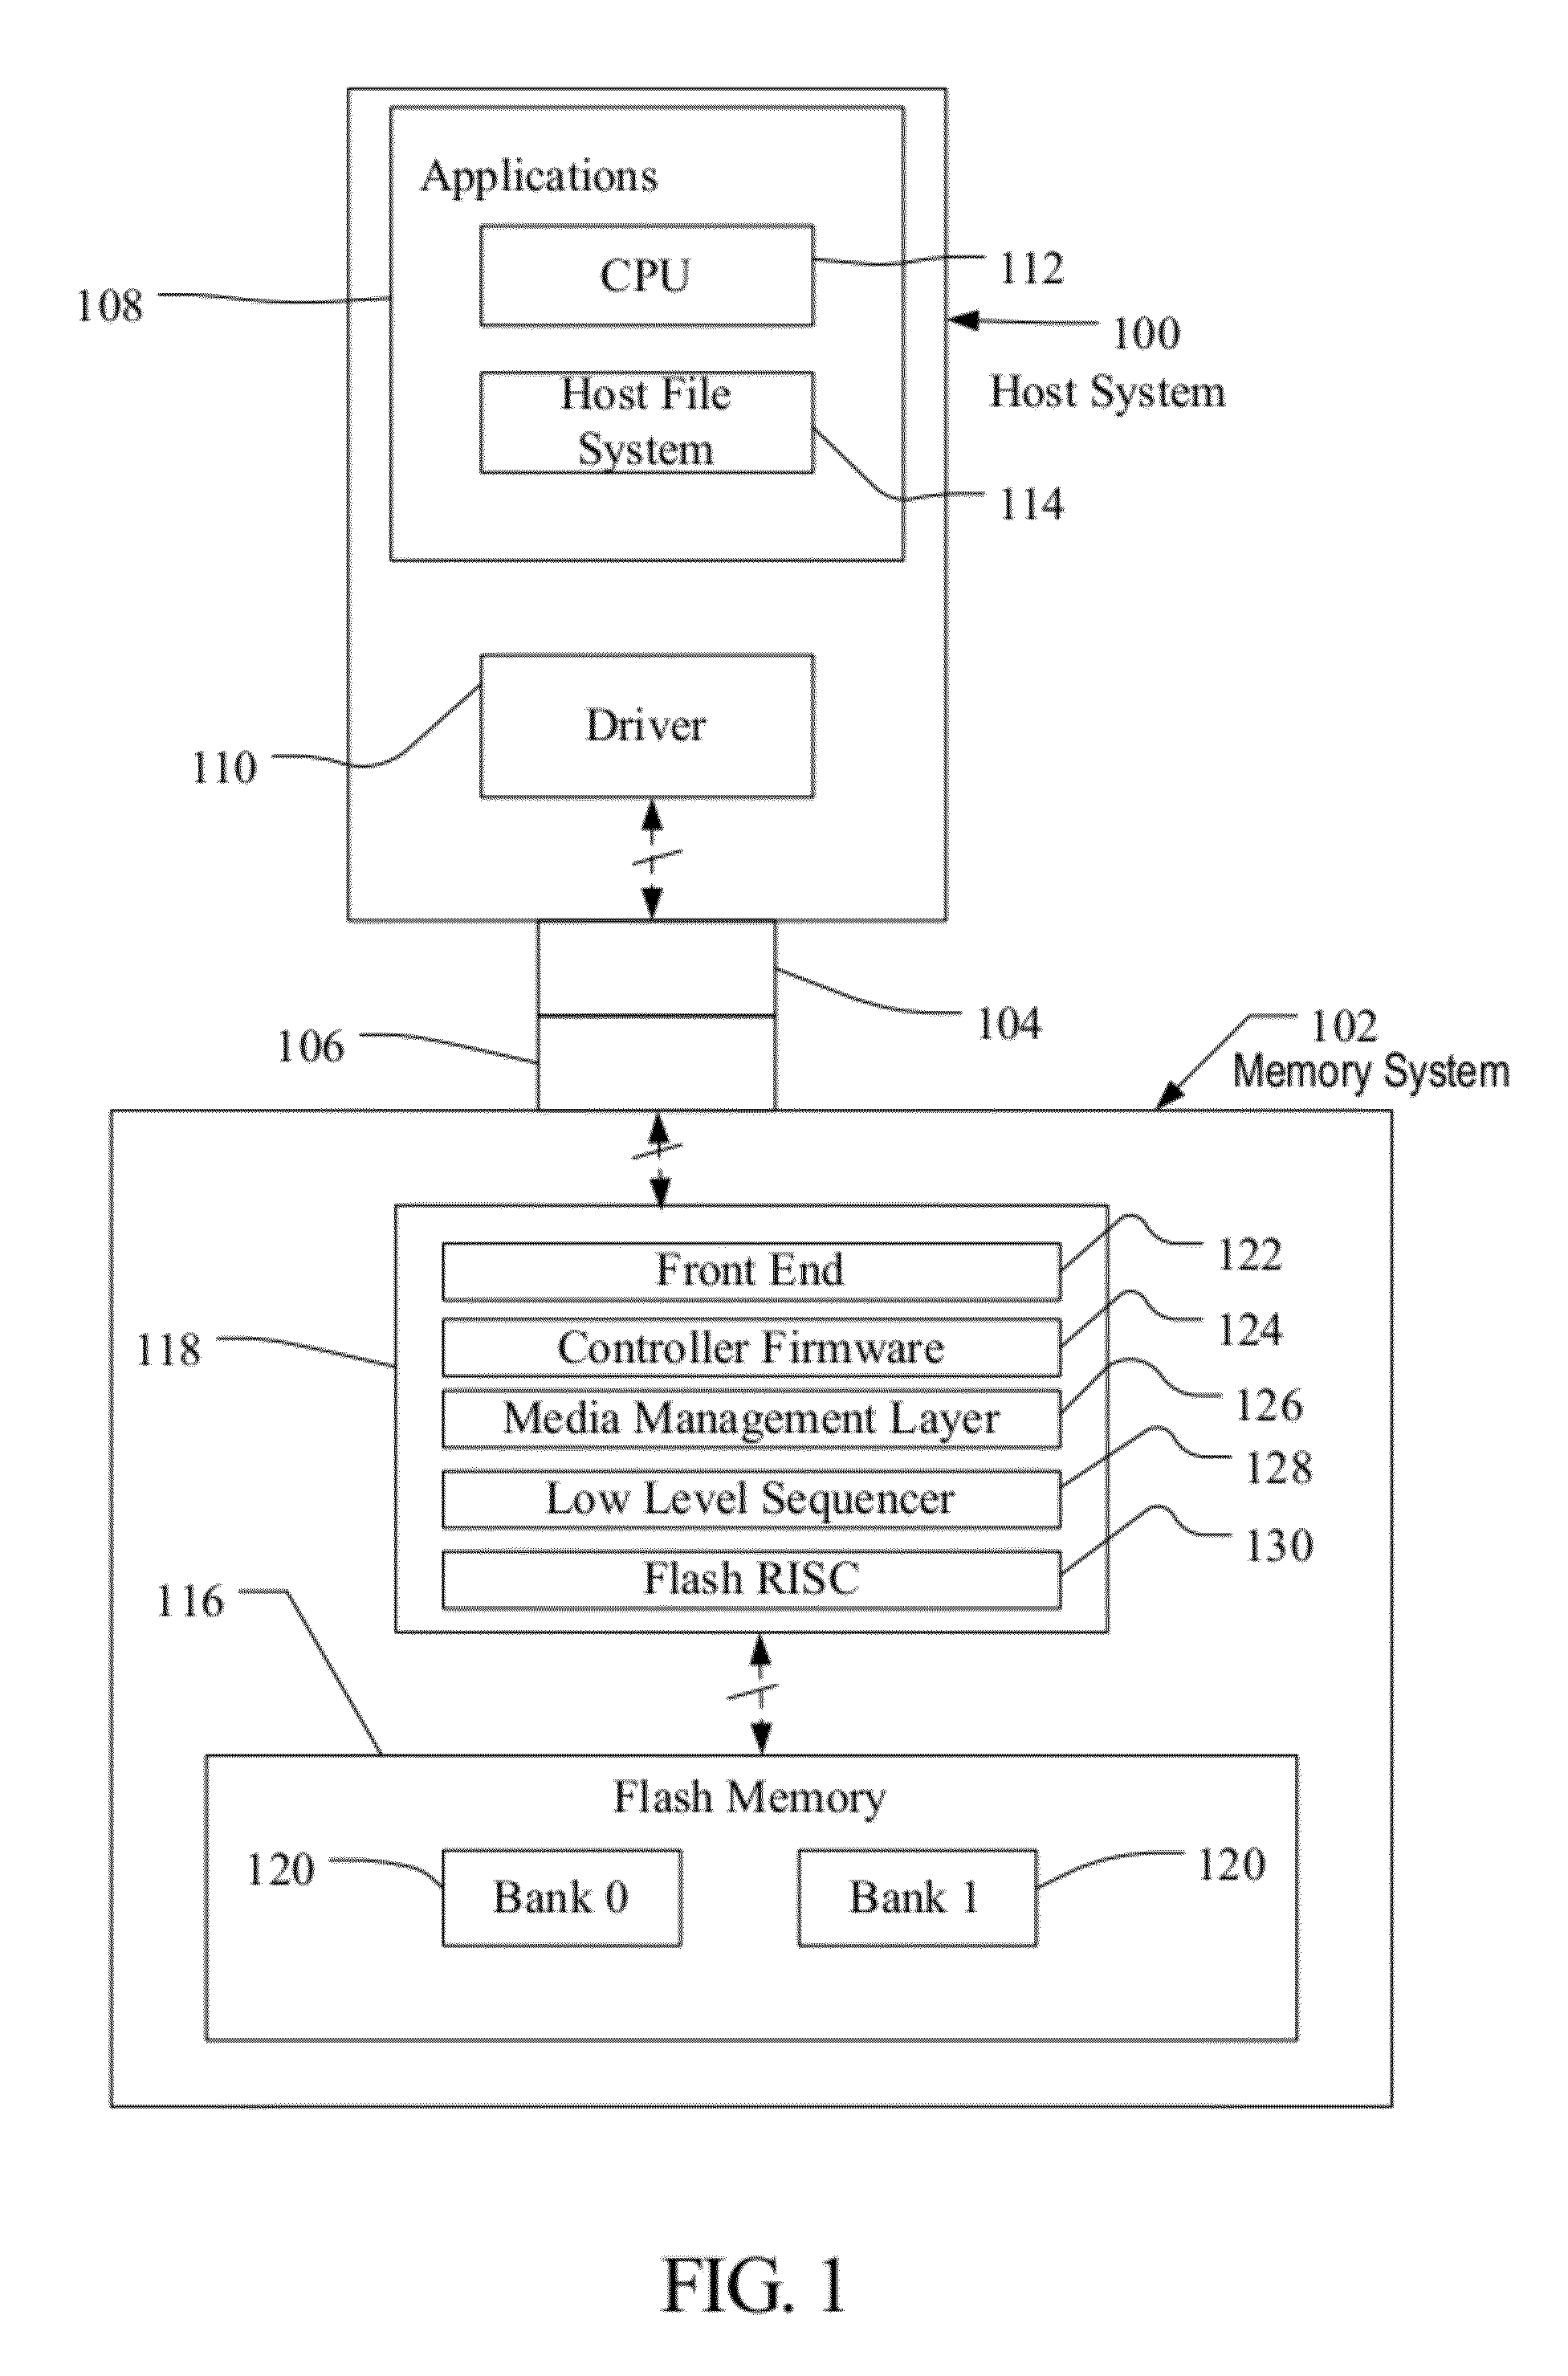 Synchronized maintenance operations in a multi-bank storage system